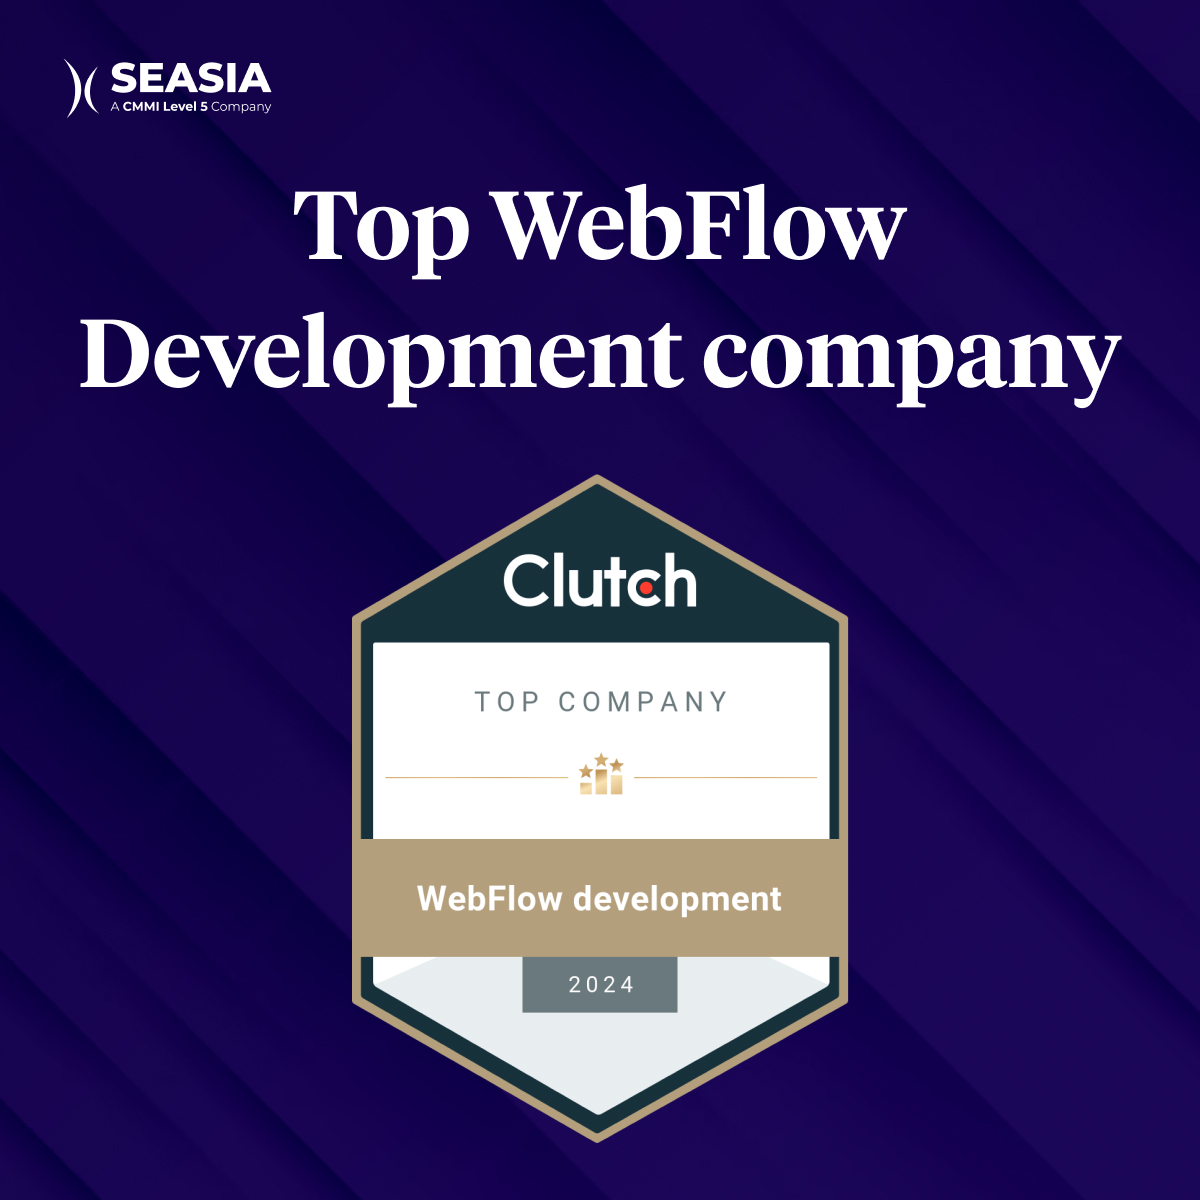 🎯Looking to level up your #Sydneybusiness with a stunning #Webflow website? Look no further! @Seasiainfotech , recognized by @clutch_co  as one of Sydney's top Webflow #development agencies, is here to help. Let's #build something amazing together!
visit: bit.ly/3Kj4gr9